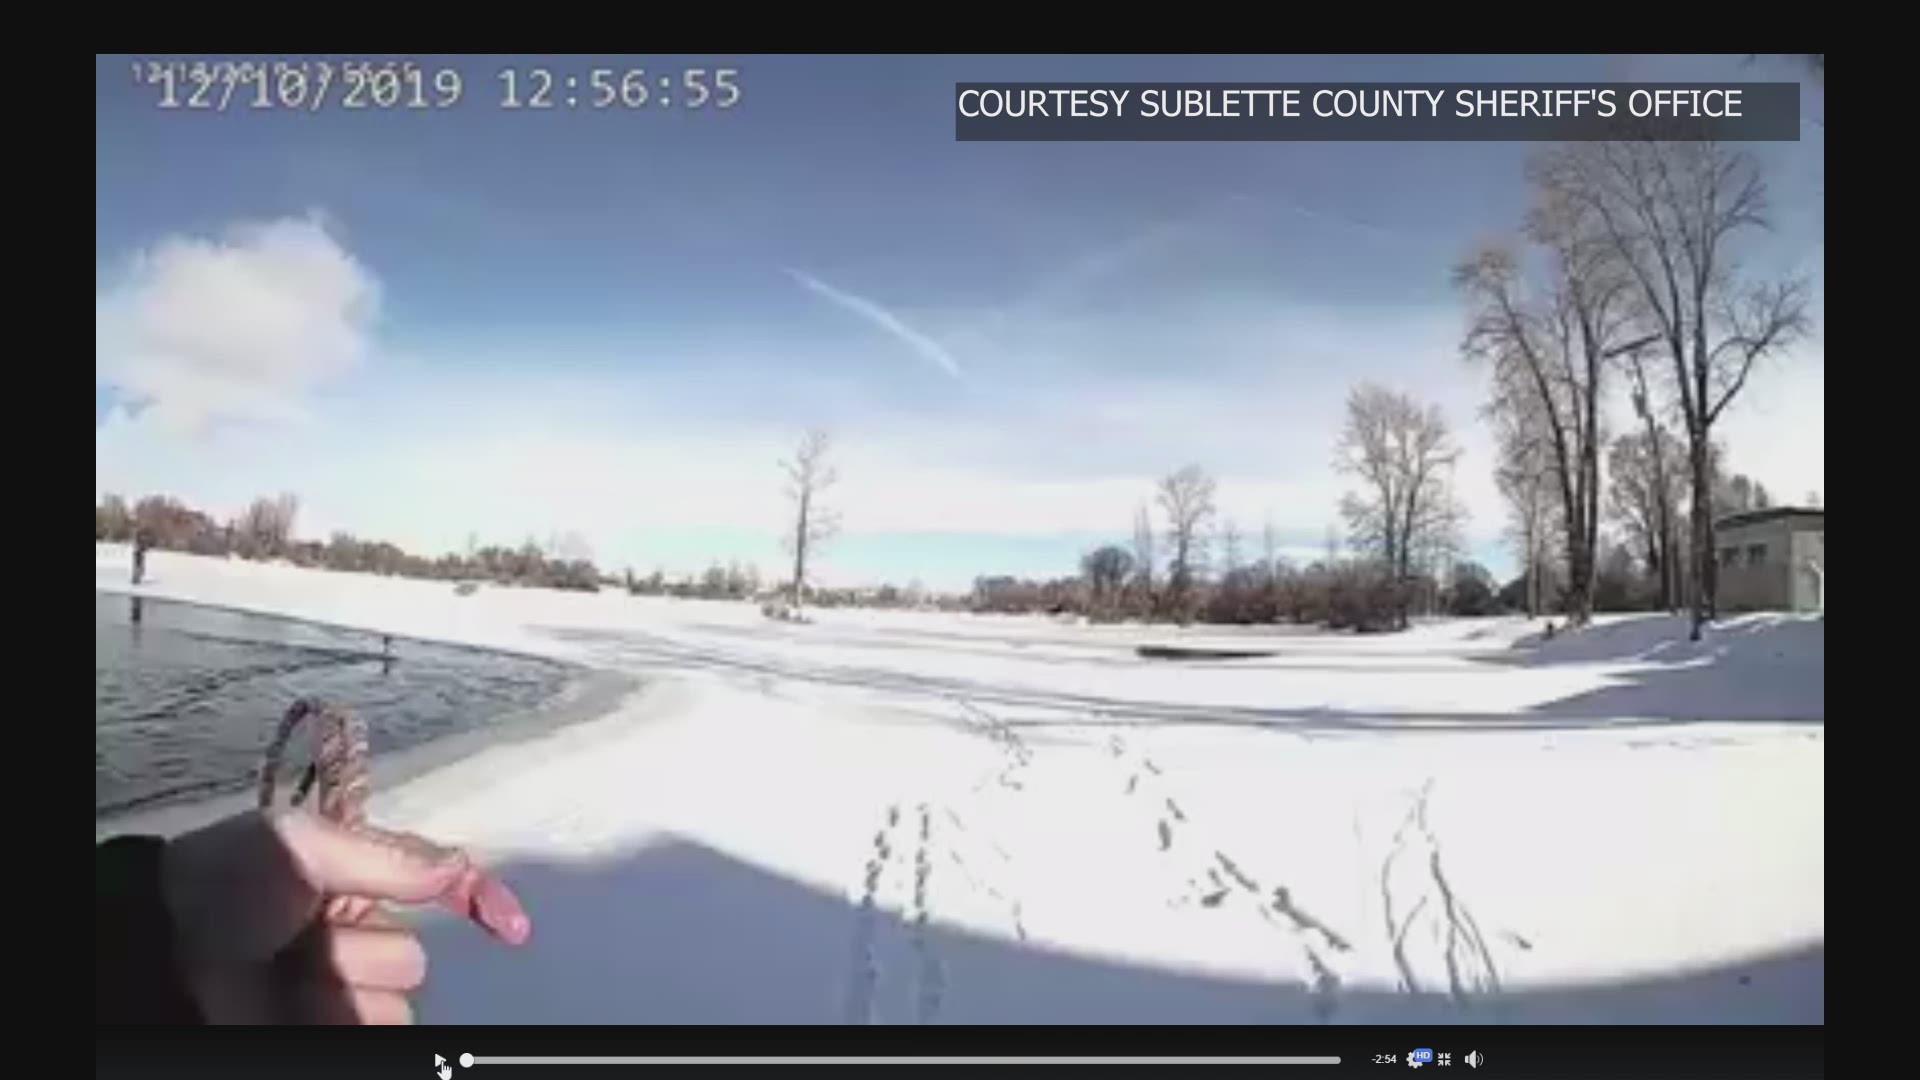 Deputies with the Sublette County Sheriff's Office in Wyoming used a lasso to rescue a deer from a pond.